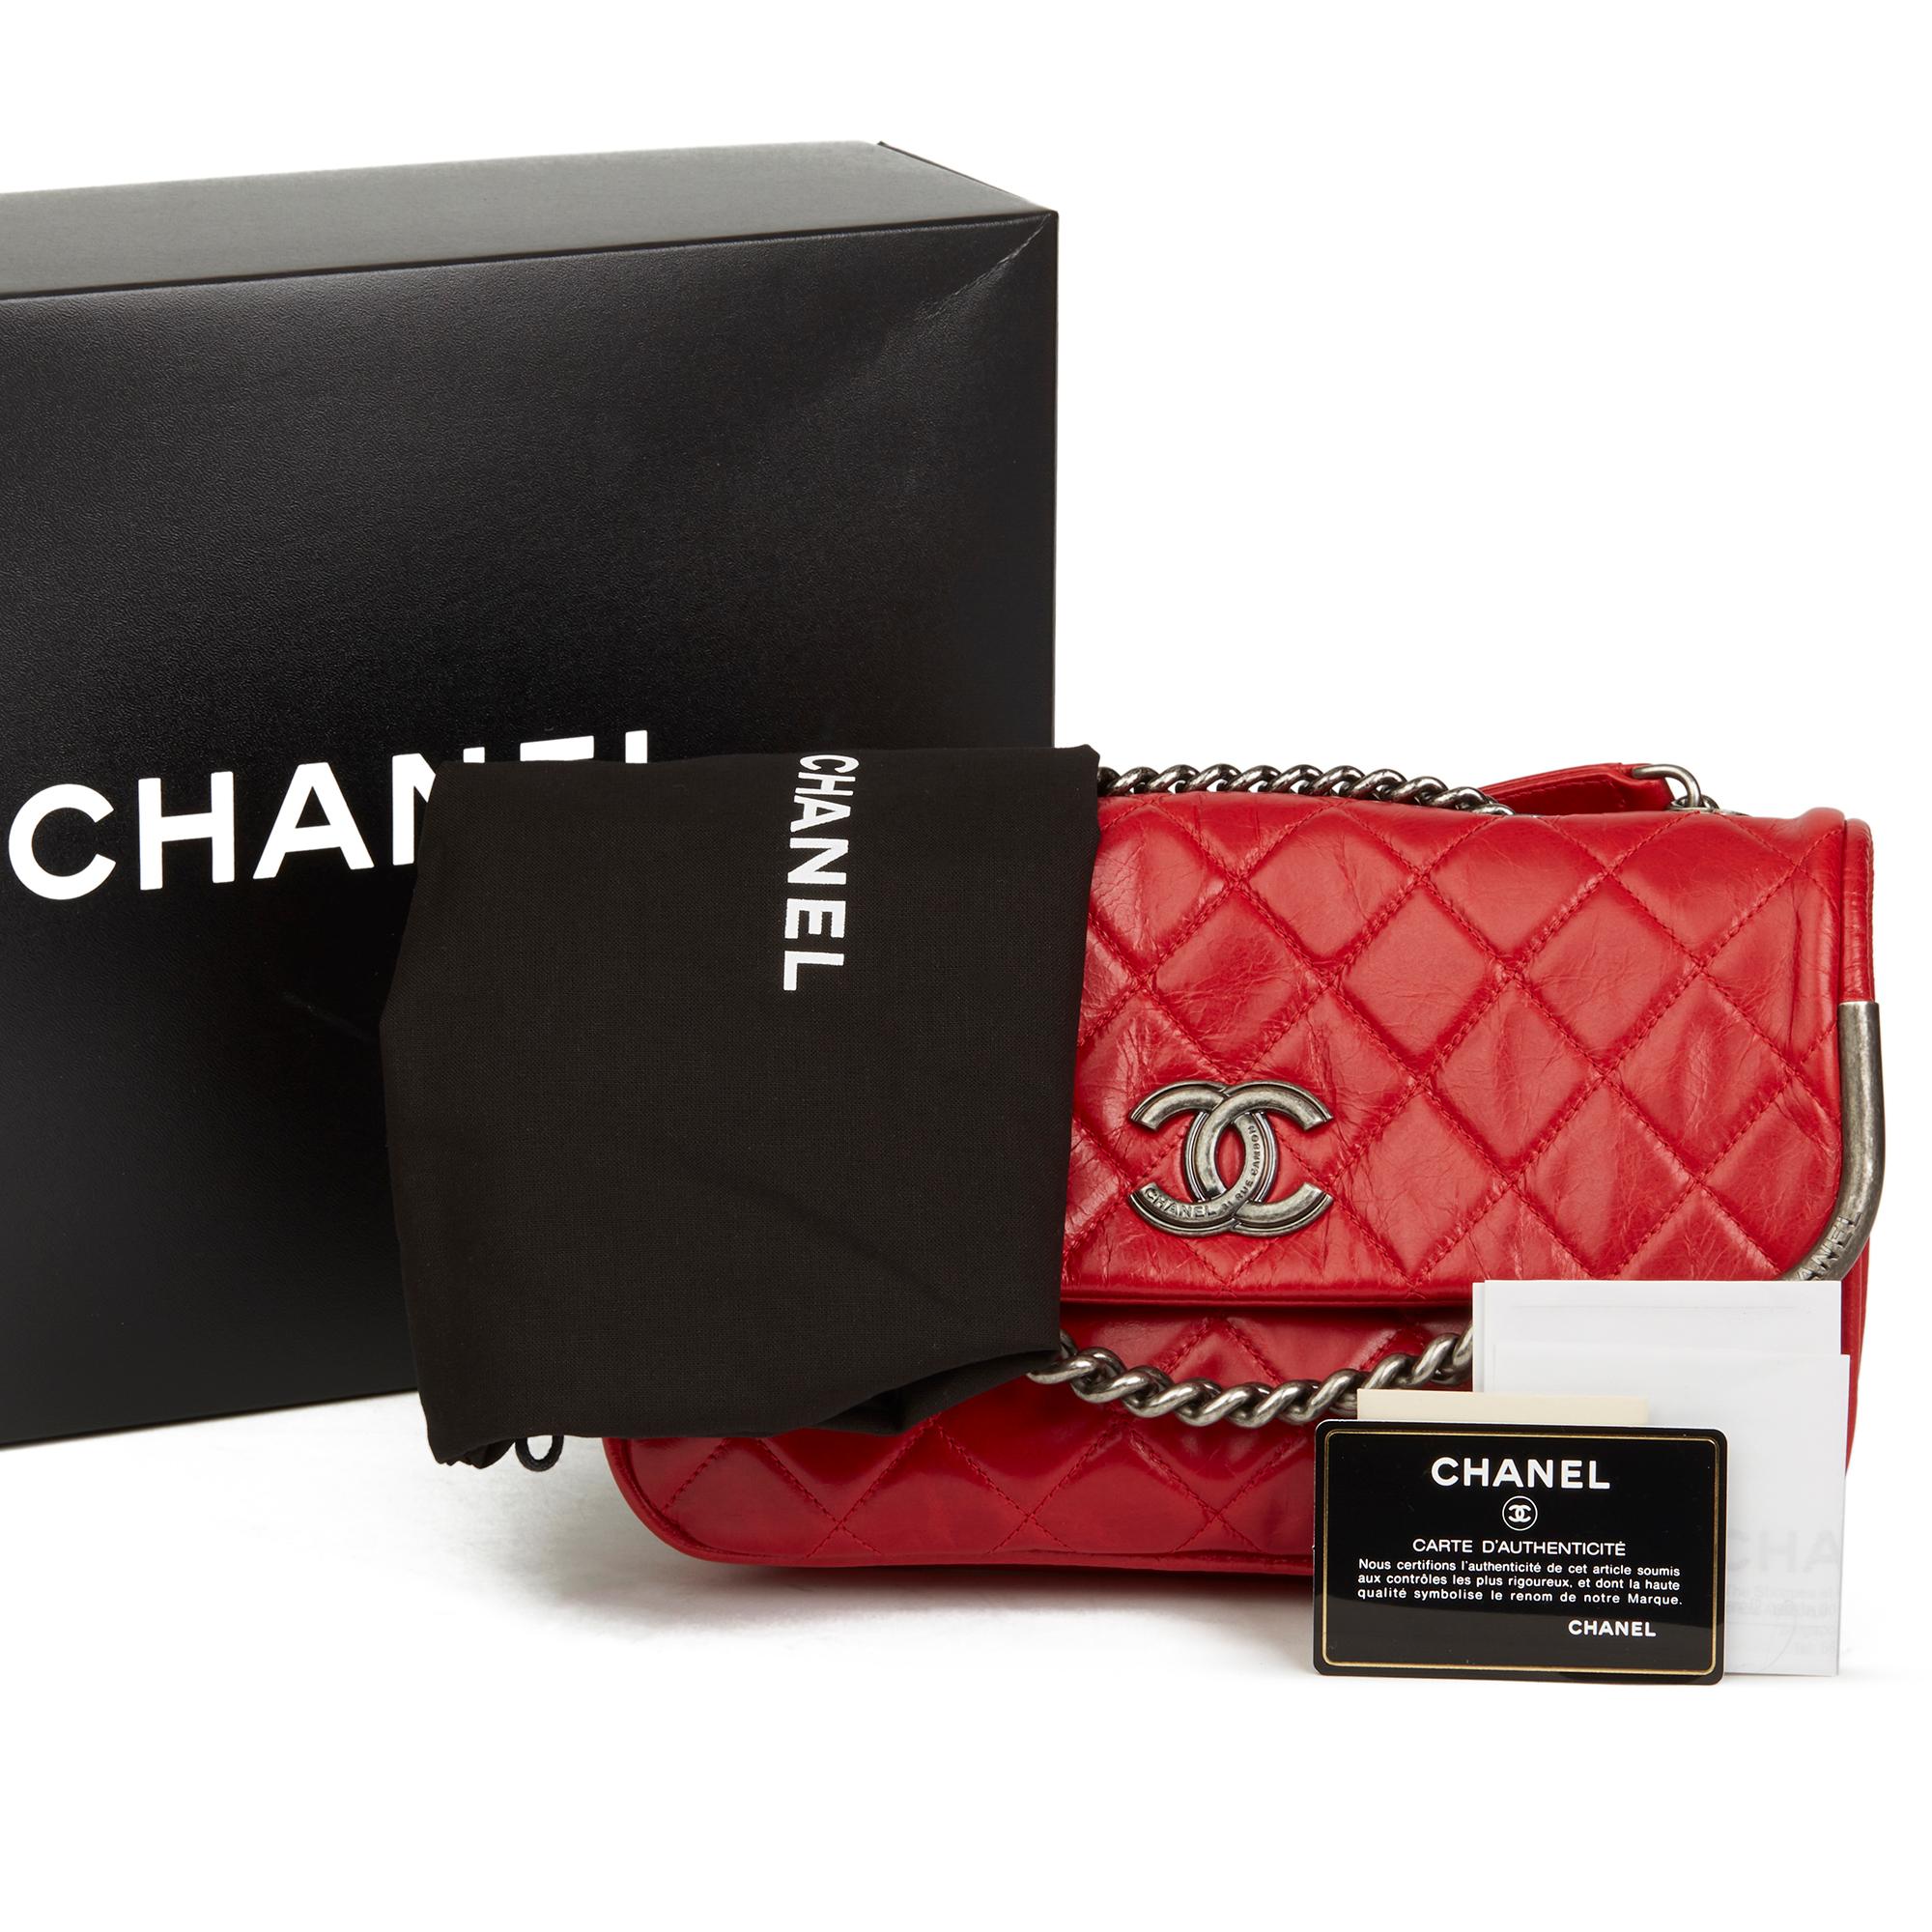 2014 Chanel Red Quilted Aged Calfskin Leather Single Flap Bag 7